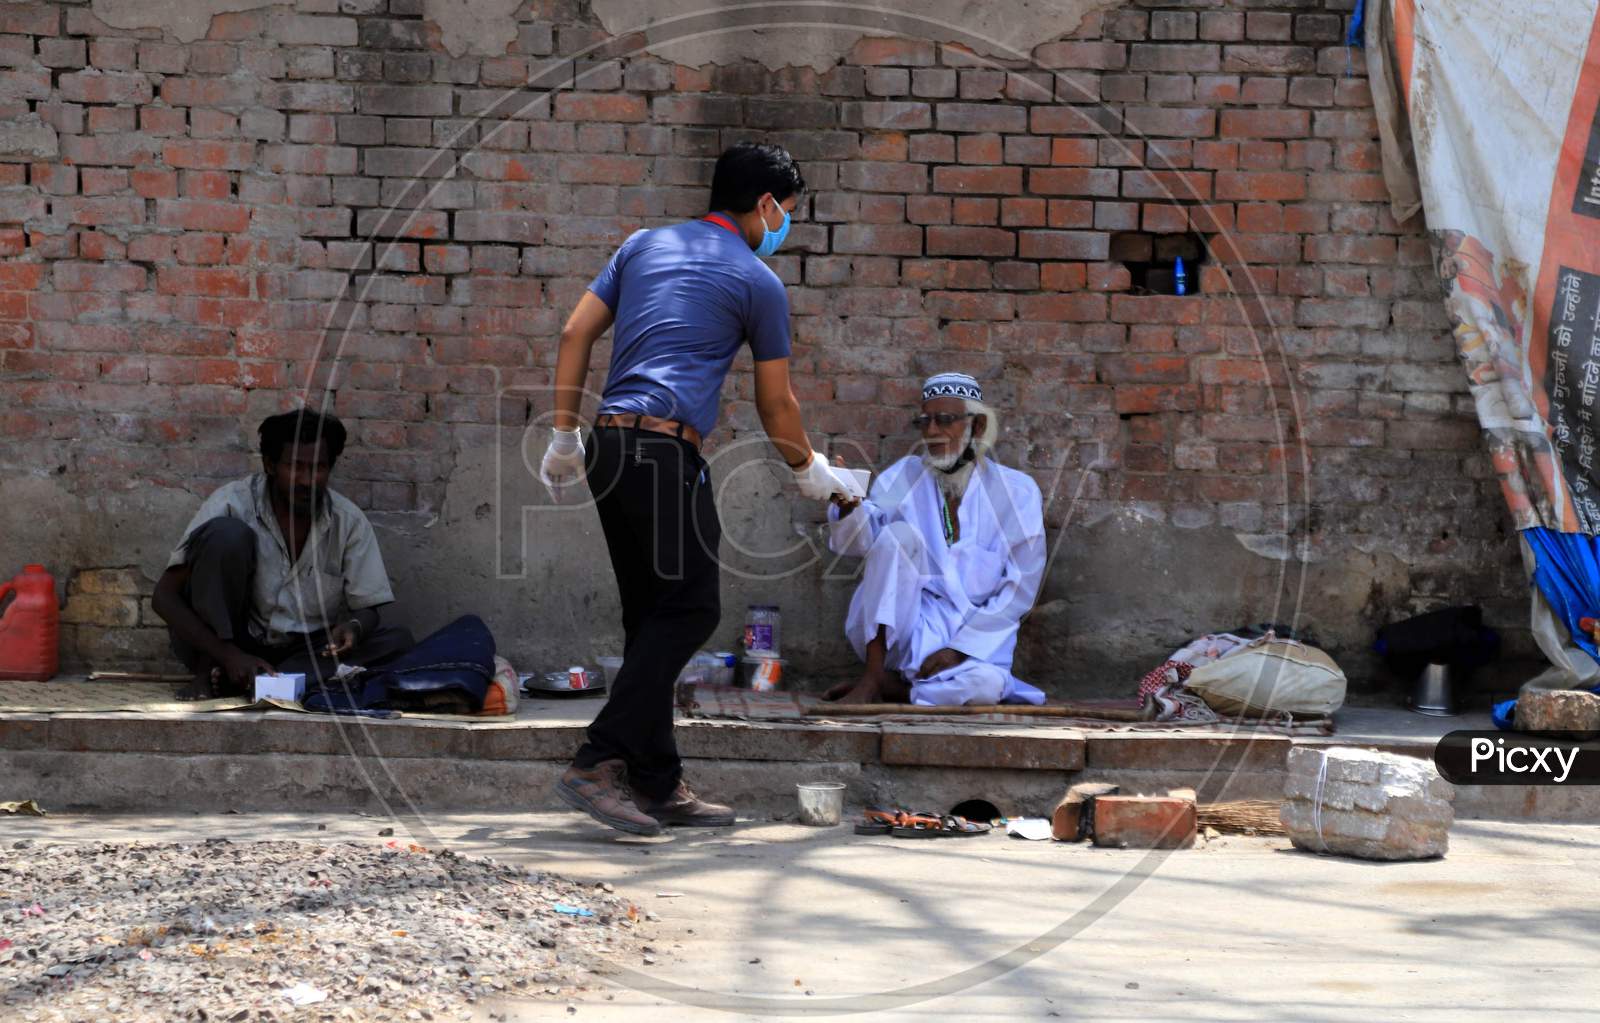 A Man Distributes Food To Homeless People During Nationwide Lockdown In Wake Of Coronavirus or COVID-19  Pandemic In Prayagraj, March 12, 2020.